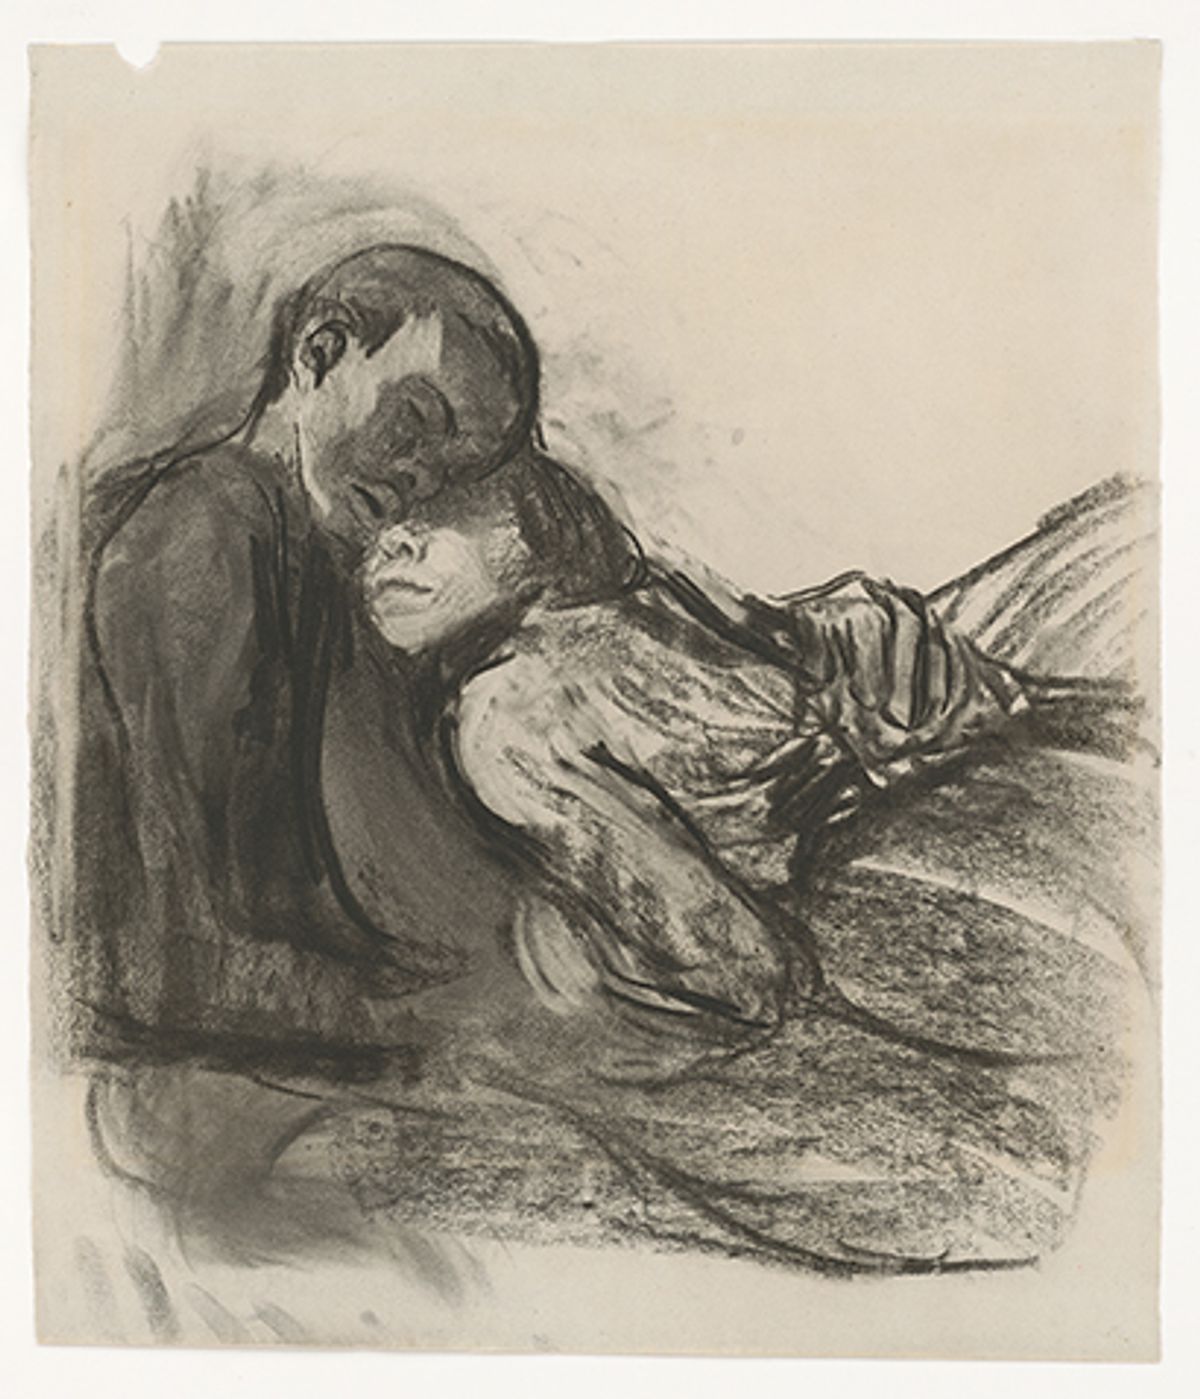 Käthe Kollwitz’s Pair of Lovers, Nestling Together (1909-10), created during a period when the German artist was ‘frequently preoccupied with the theme of sexuality’   Photo: © Claudia Goldberg,  Saša Fuis; © Käthe Kollwitz Museum Köln